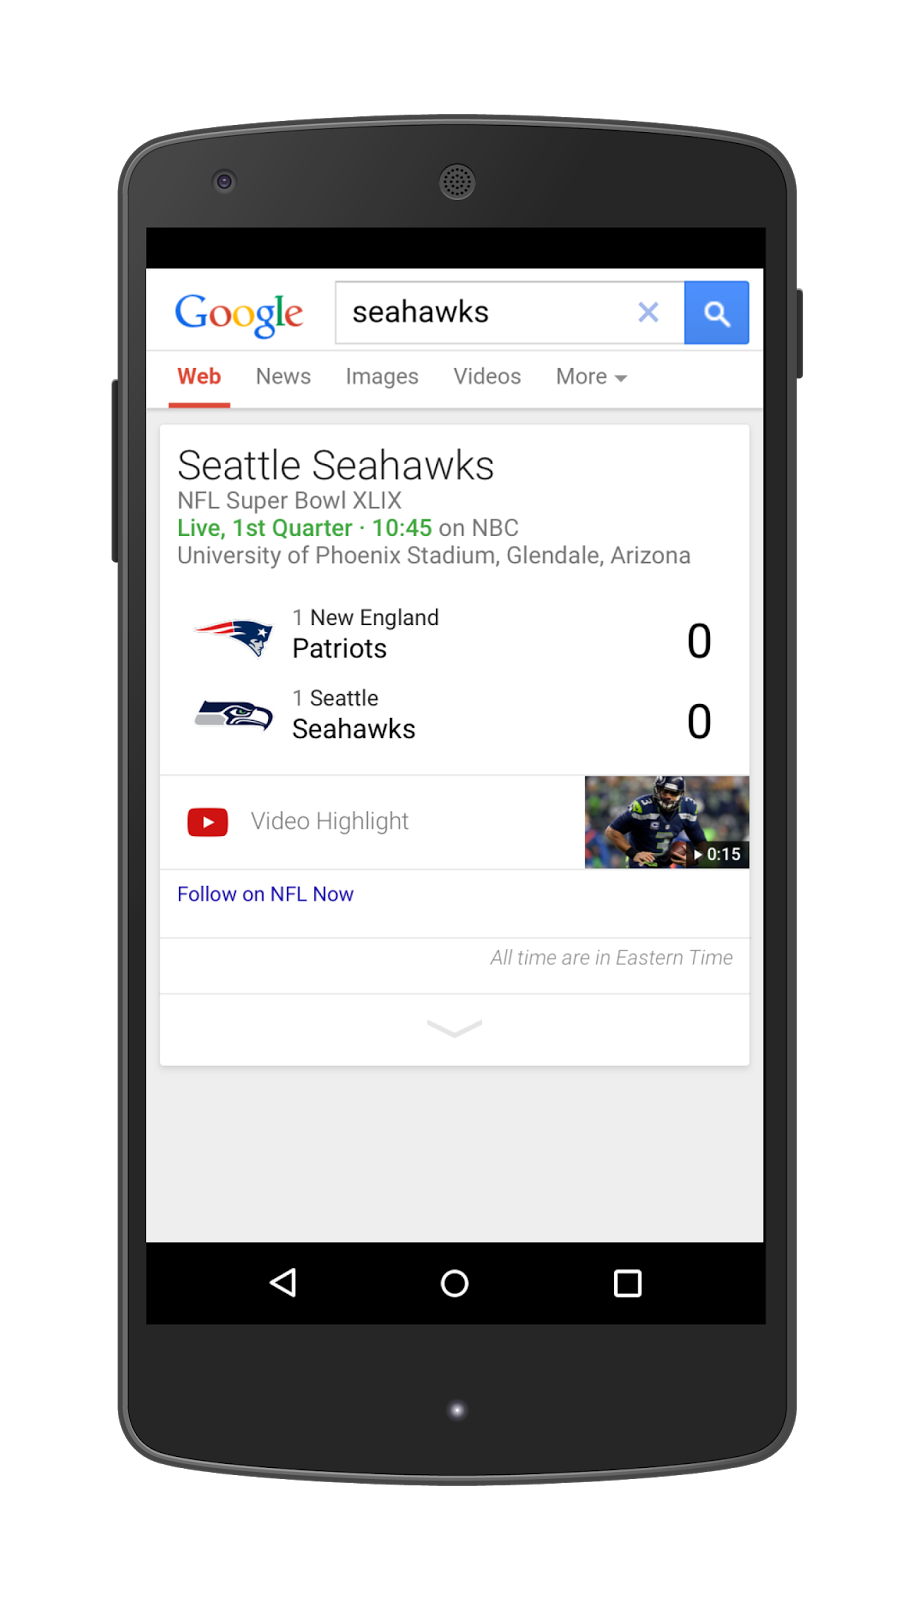 NFL YouTube channel in Google Search on mobile phone